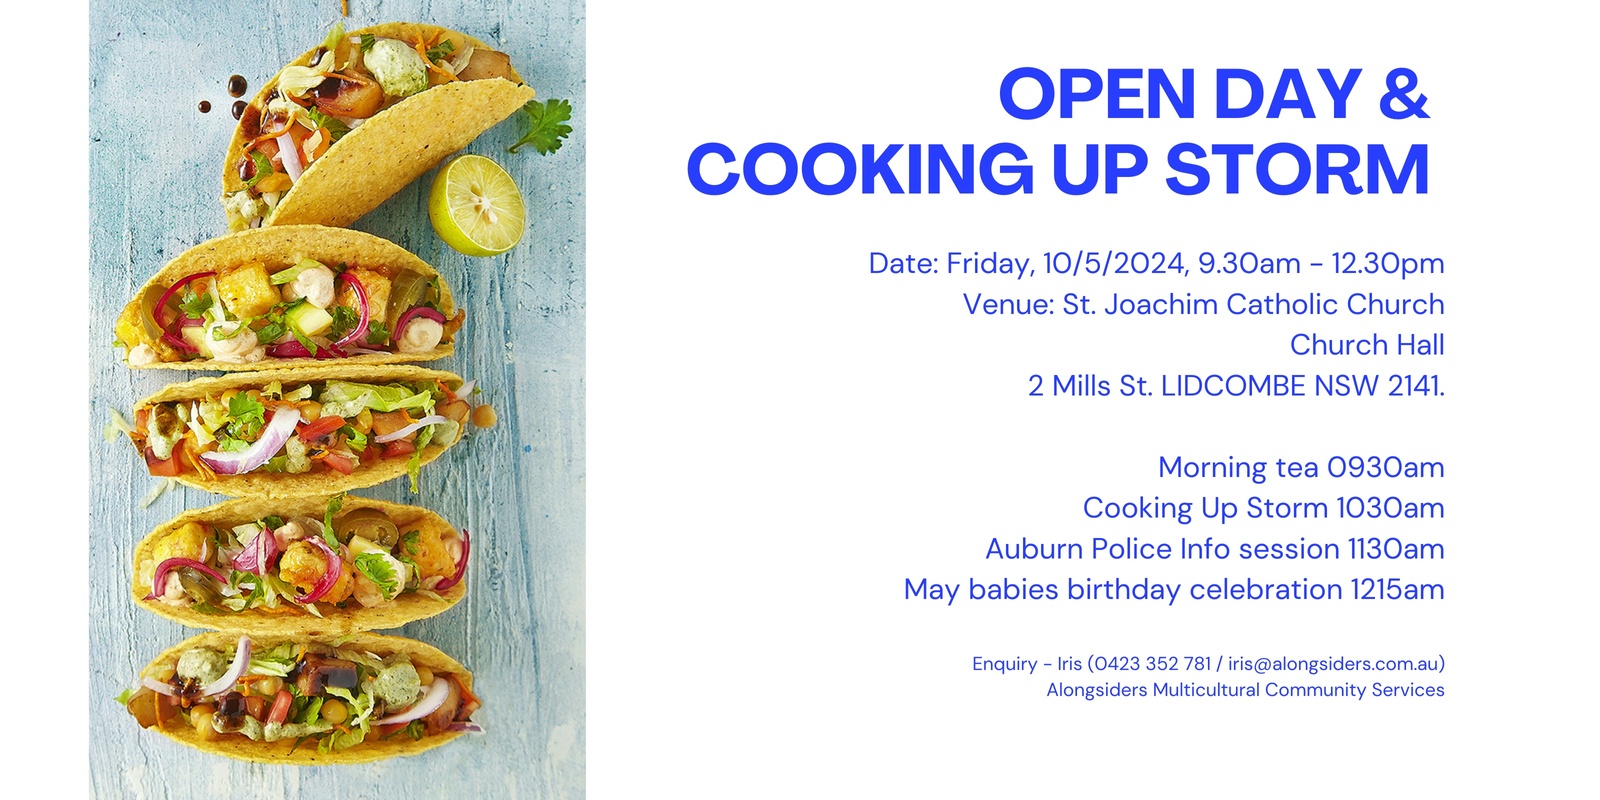 Banner image for Open Day & Cooking Up Storm hosted by Alongsiders Multicultural Community Services